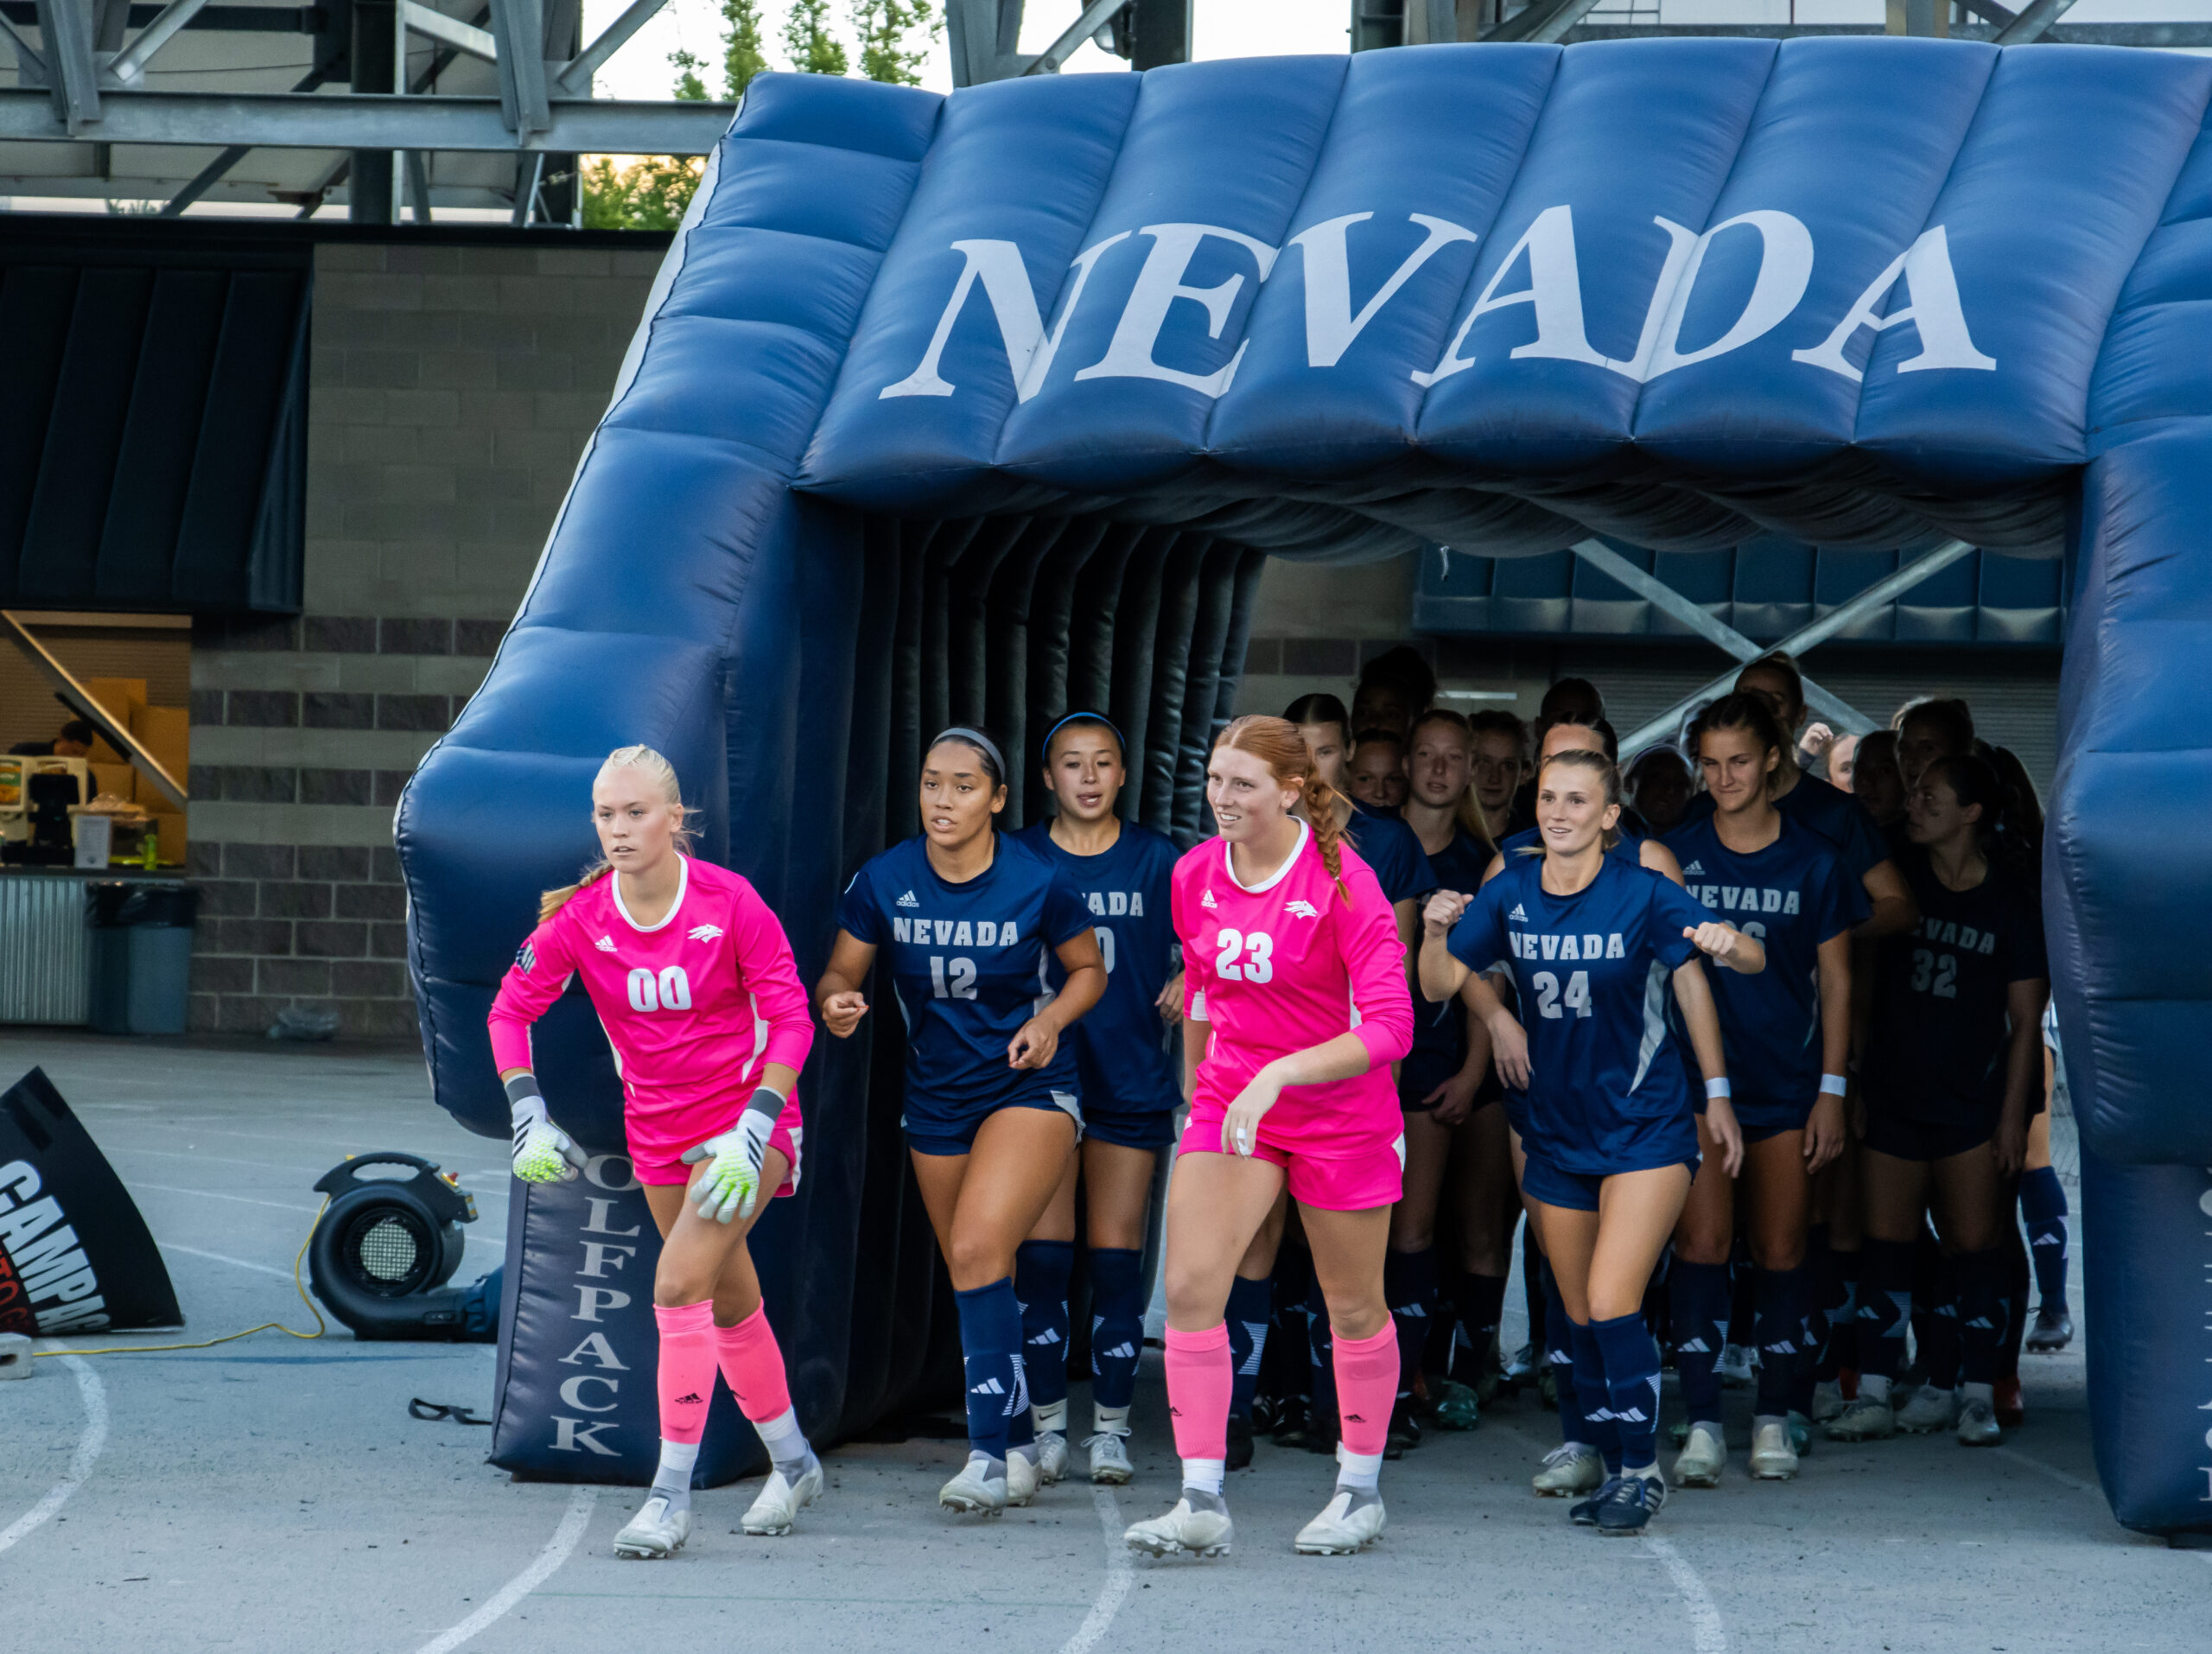 Blake’s late goal pushes Nevada to beat Air Force 1-0